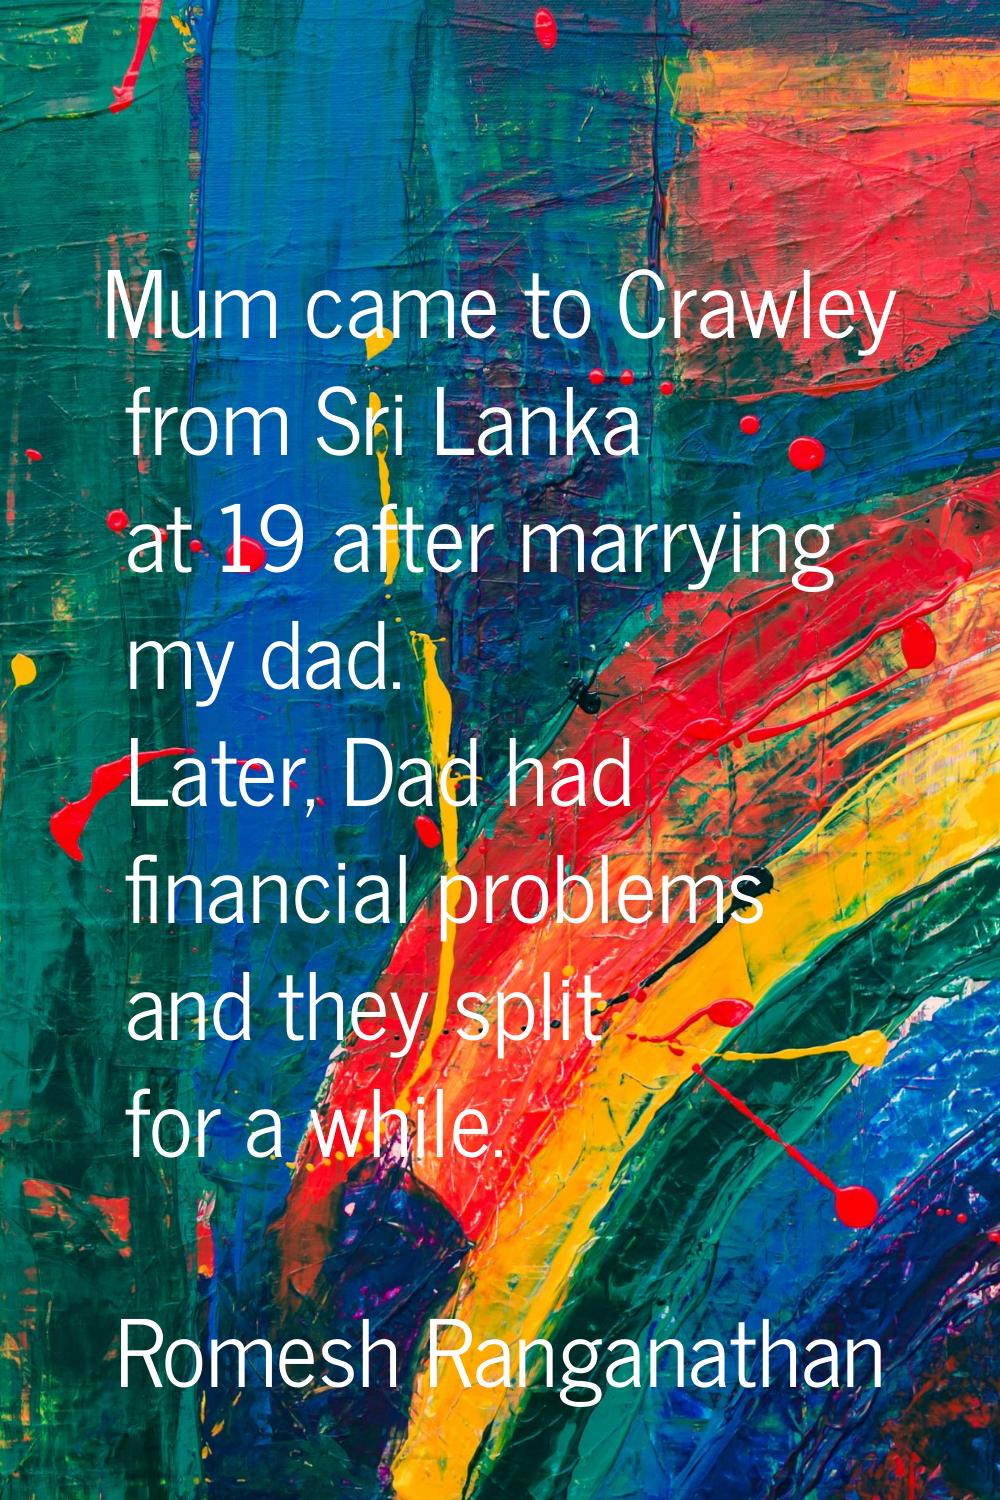 Mum came to Crawley from Sri Lanka at 19 after marrying my dad. Later, Dad had financial problems a